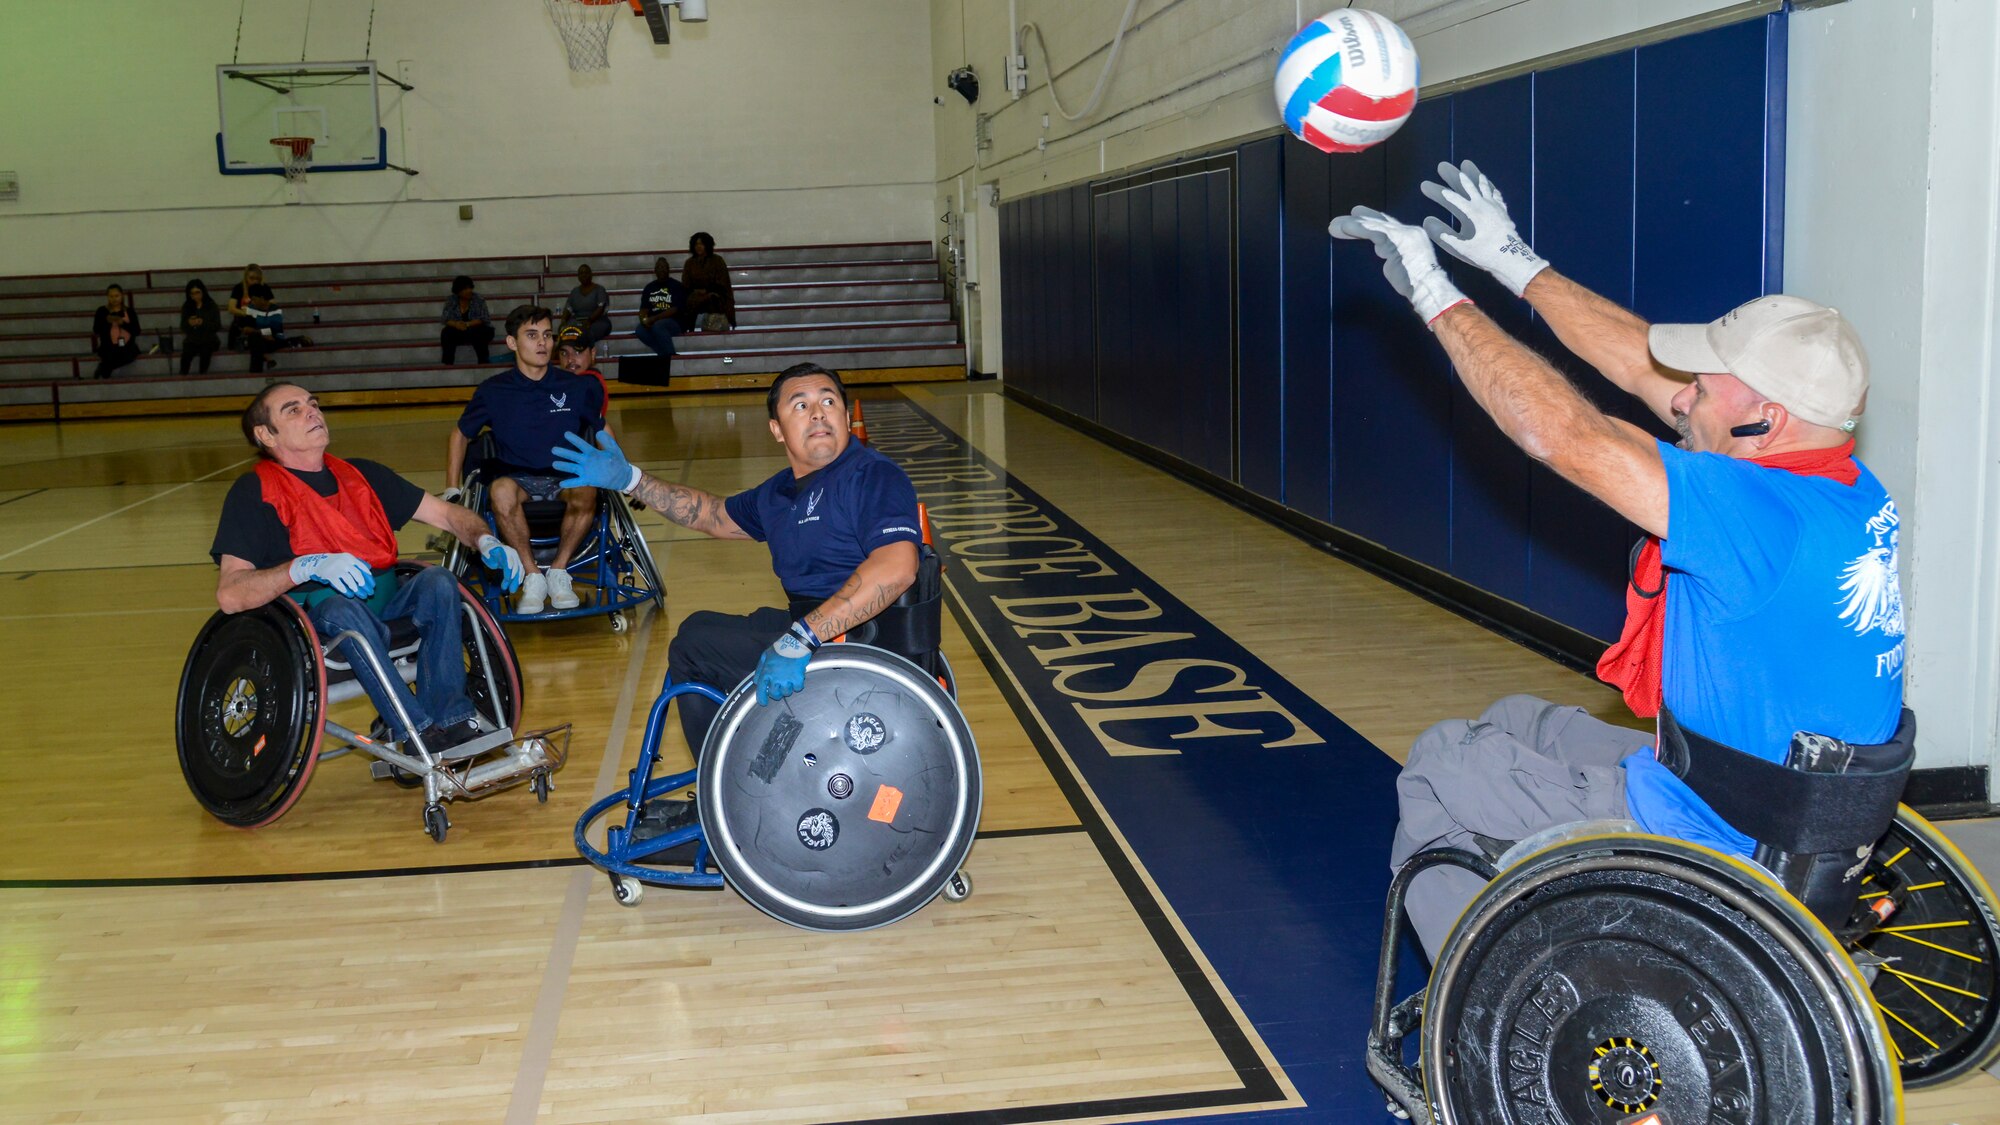 A player throws a ball back into play during a Murderball wheelchair rugby demonstration at Edwards Air Force Base, Oct. 24. The demonstration was headed by the Triumph Foundation, a non-profit organization, in support of the base's observance of National Disability Employment Awareness Month. (U.S. Air Force photo by Giancarlo Casem)